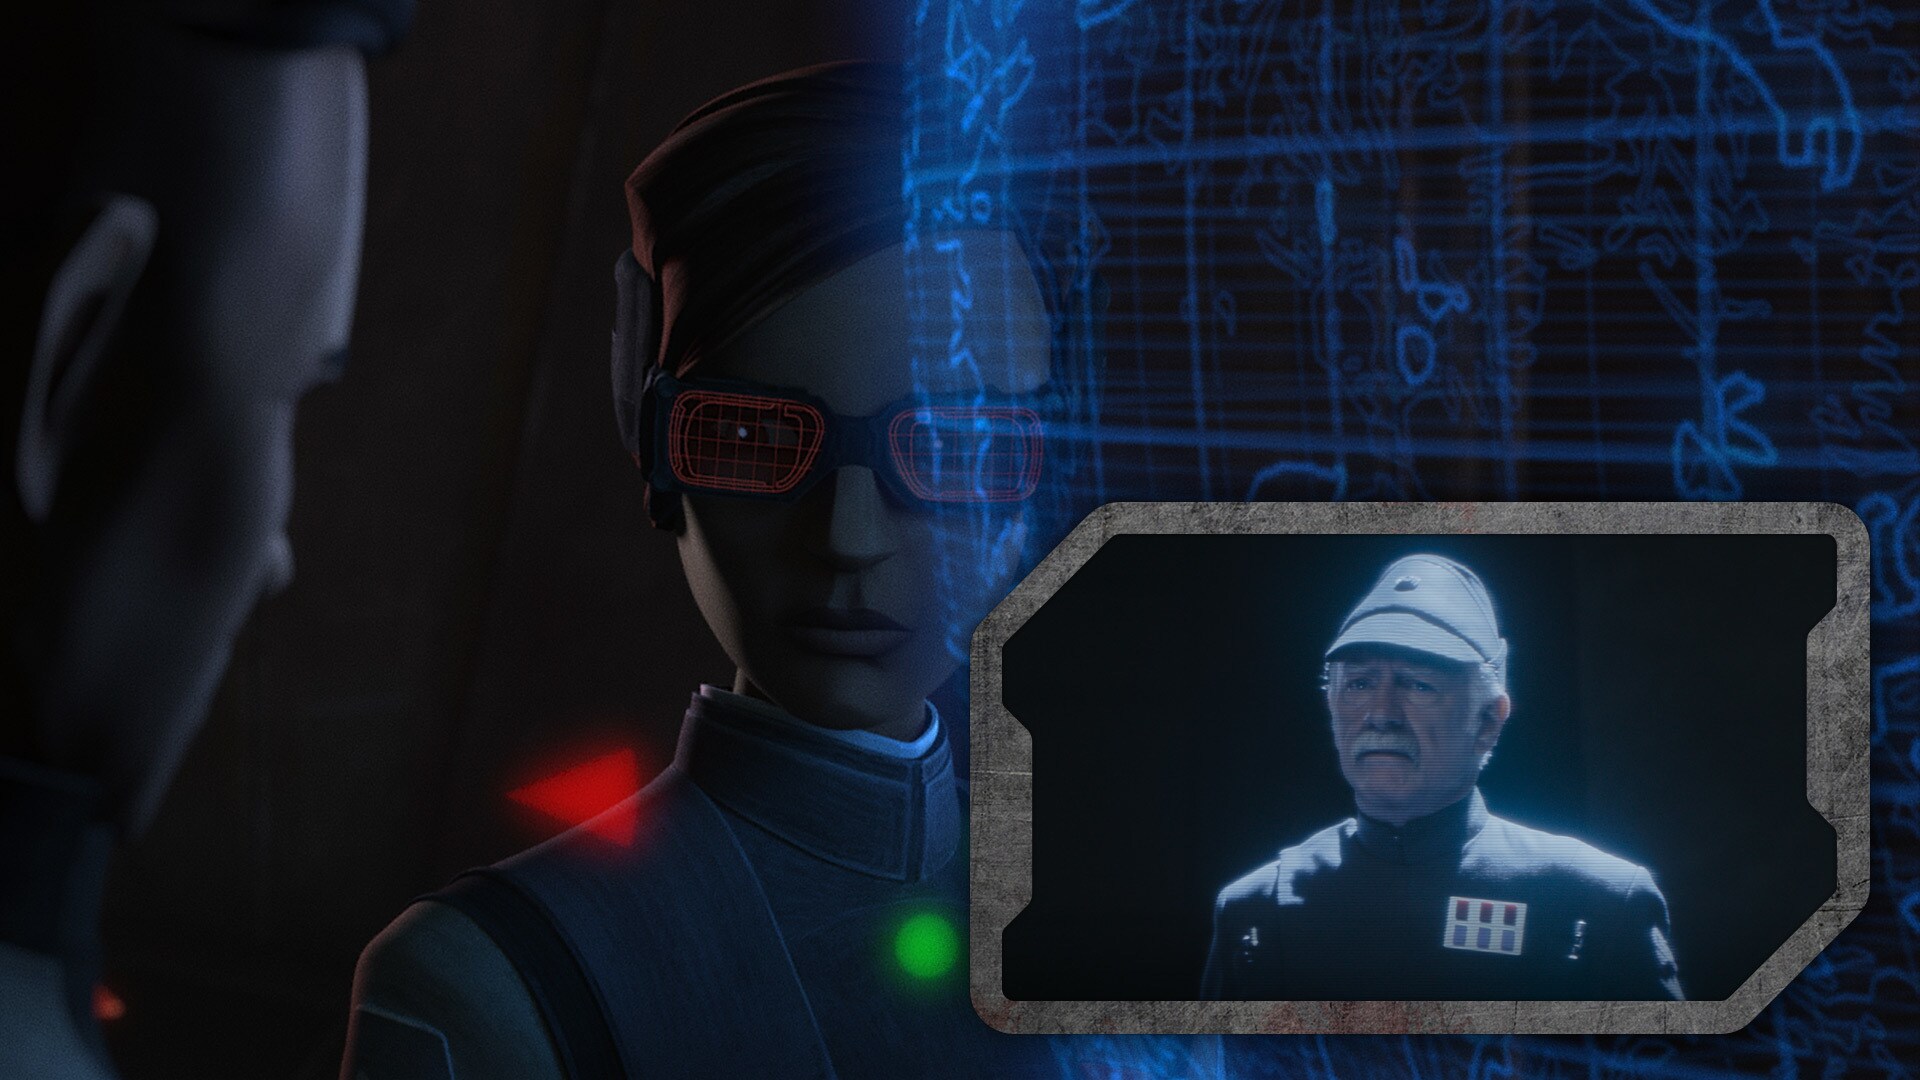 Hemlock discusses "Project Necromancer," an Imperial science project first mentioned by Captain Pellaeon in The Mandalorian Chapter 23.